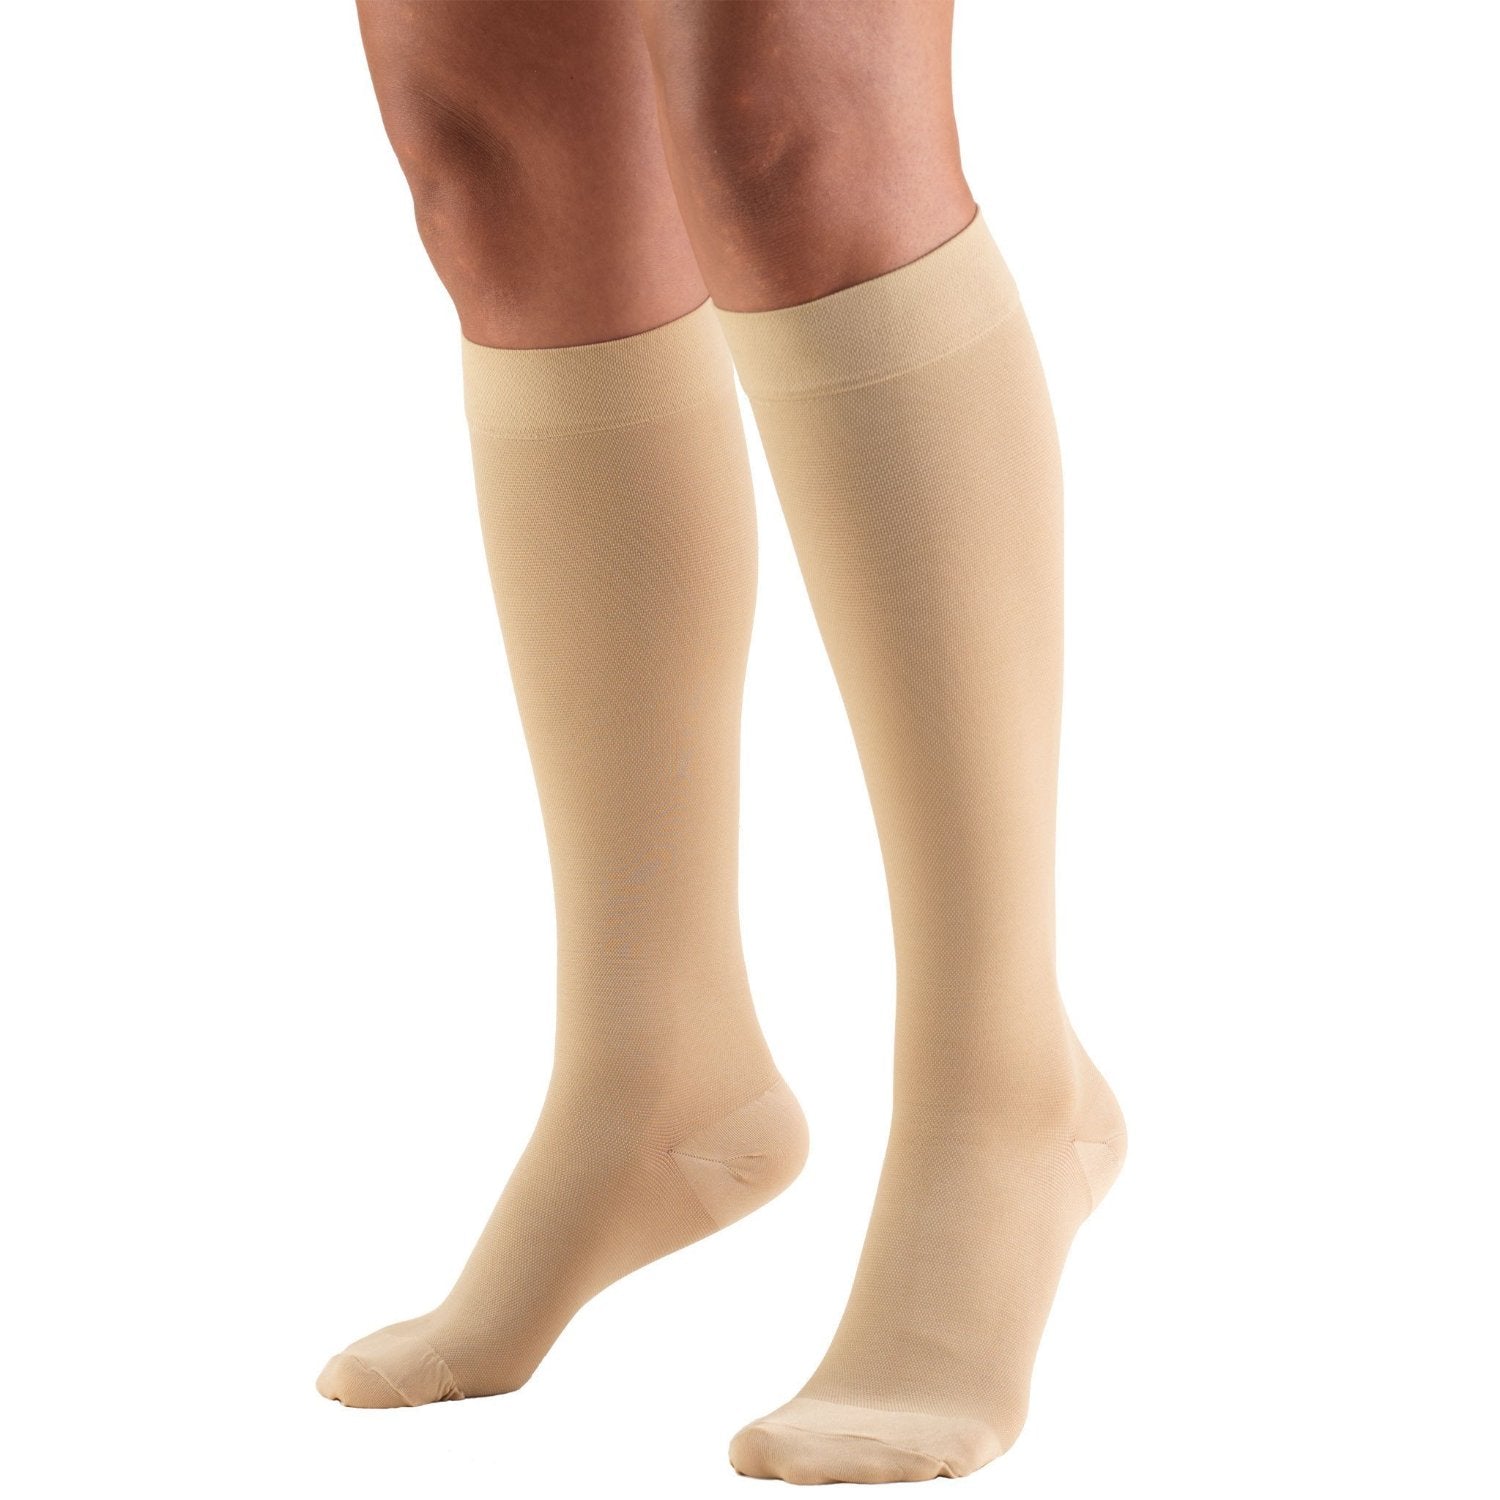 Compression Stockings Firm Support Socks Varicose Veins Edema 15